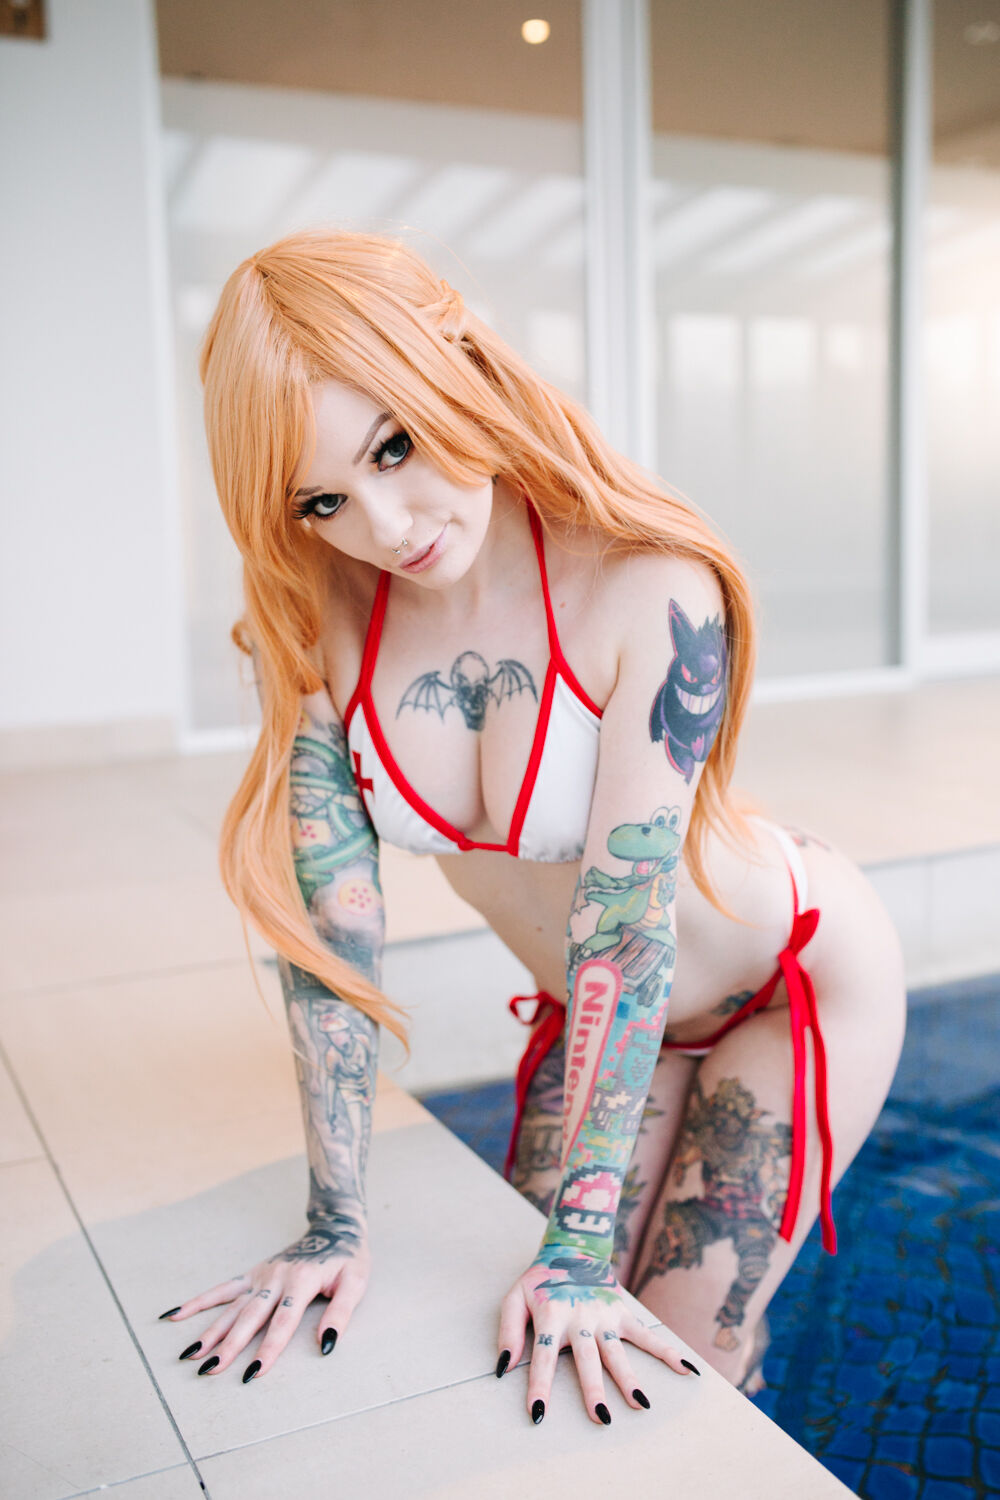 daphne naidoo recommends Hylia Suicide Vk